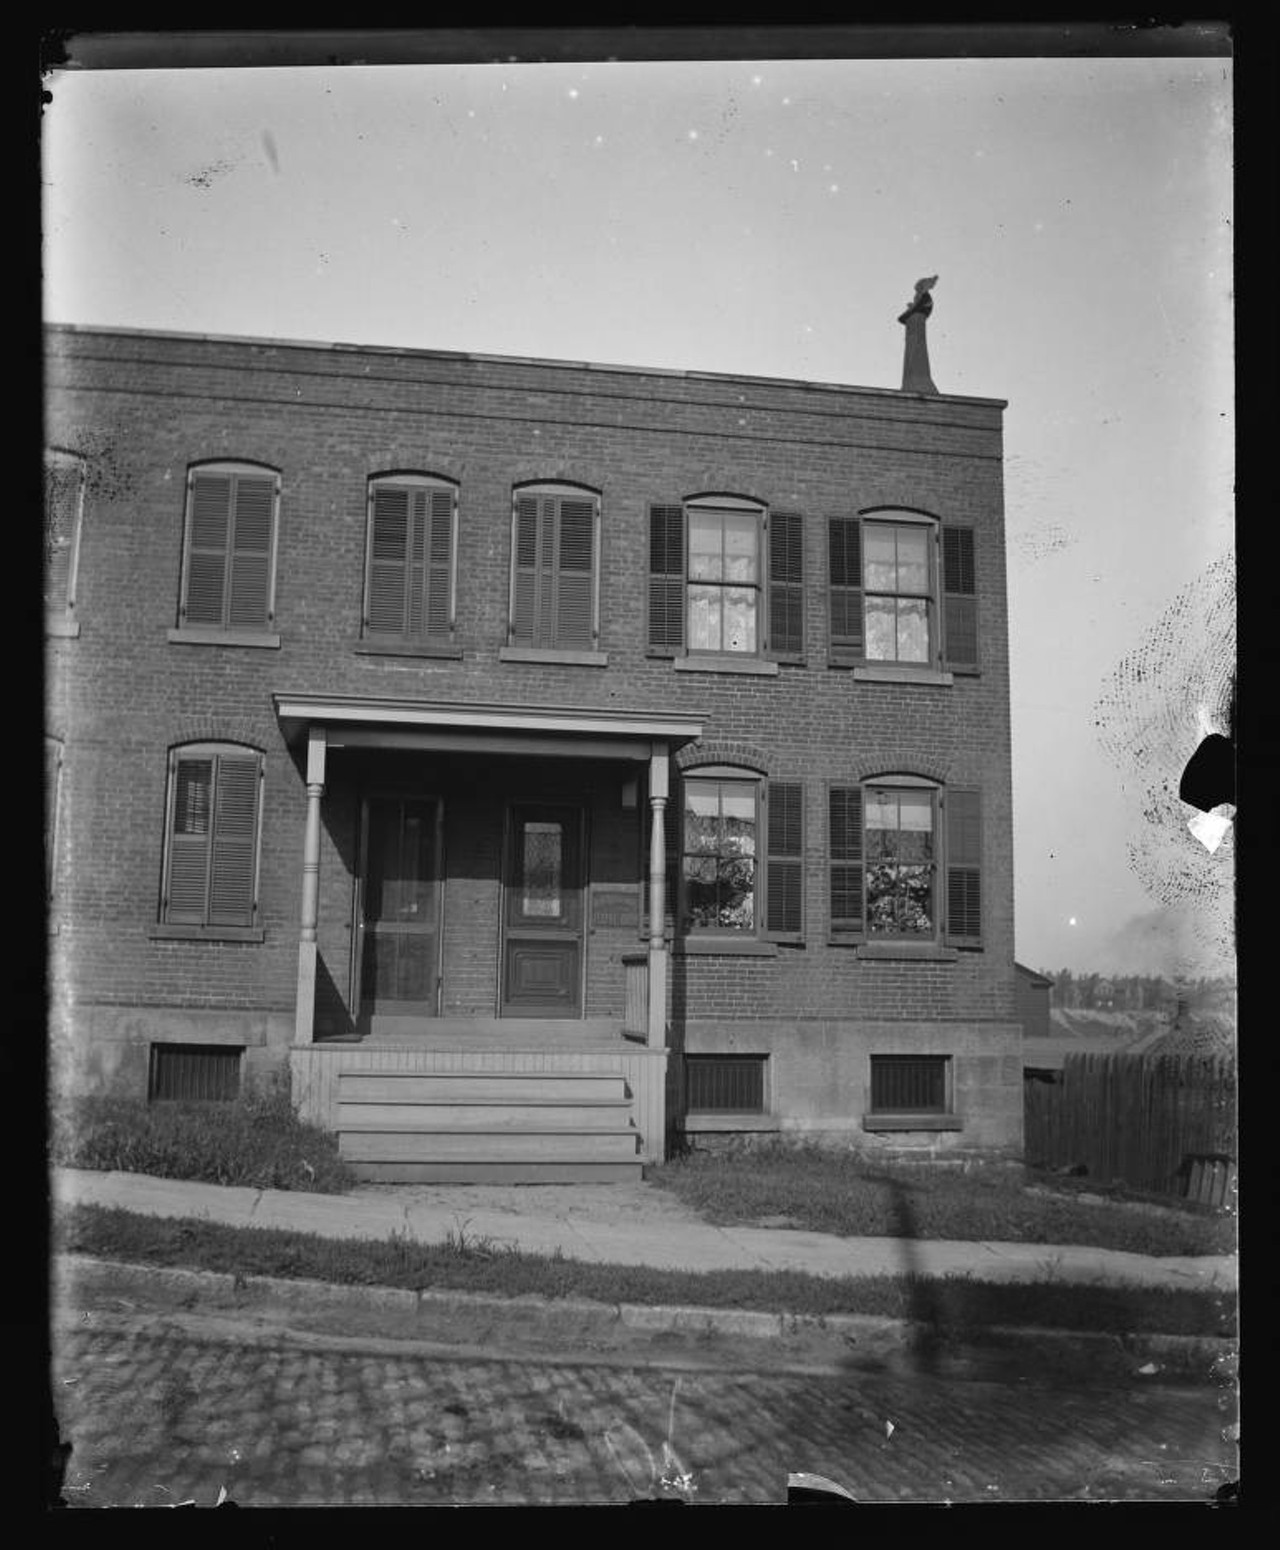 William B. Ketteringham Office (Father of Photographer), 1900